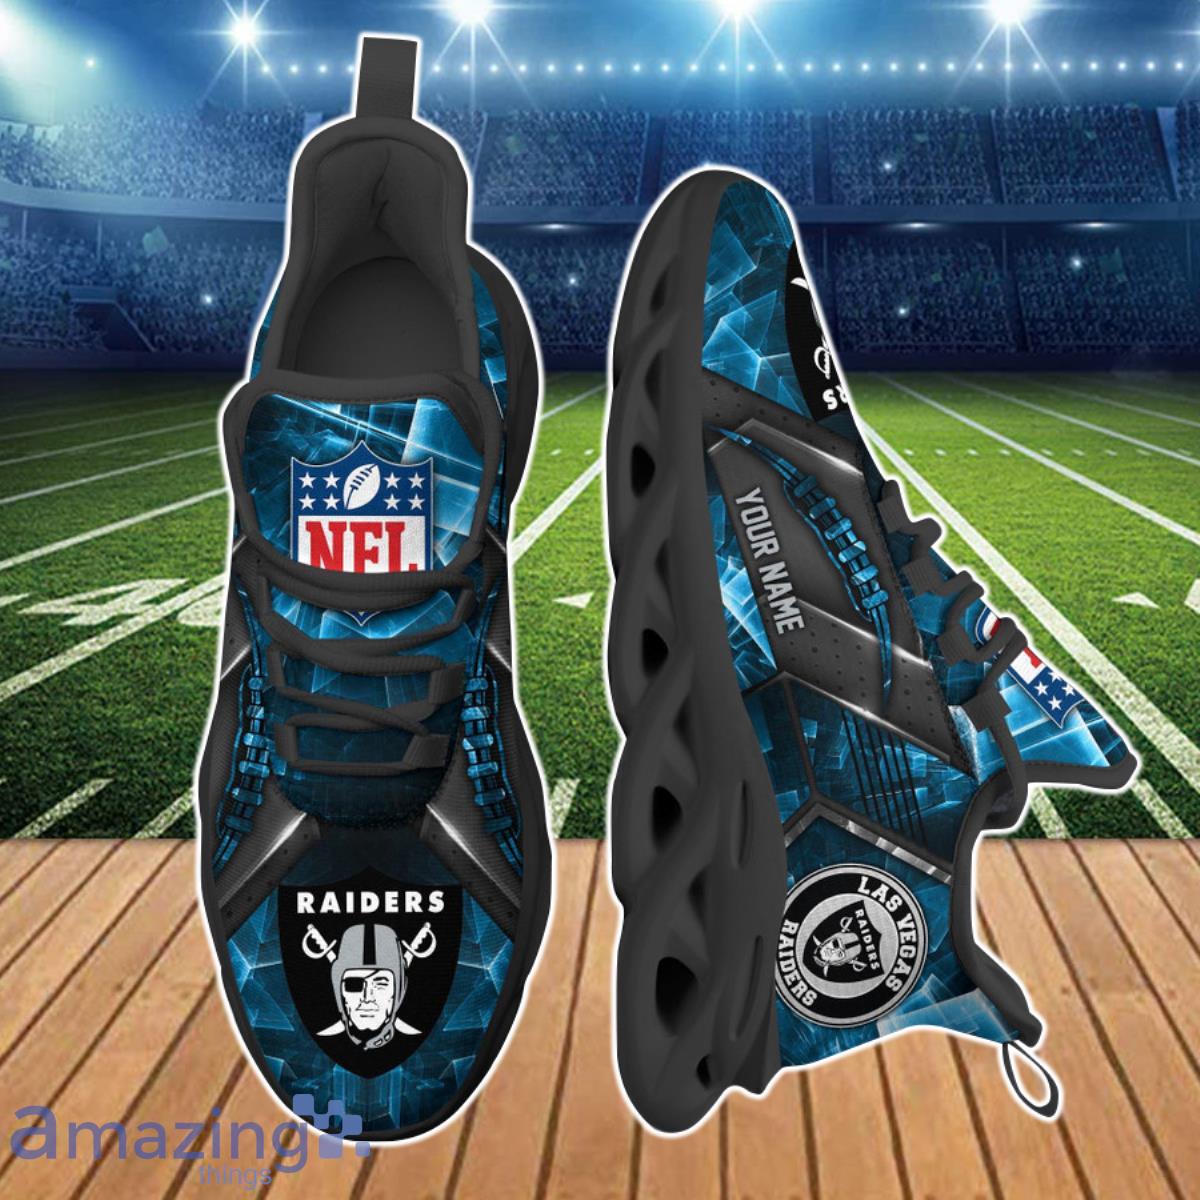 Las Vegas Raiders NFL Clunky Max Soul Shoes Custom Name Ideal Gift For Men  And Women Fans